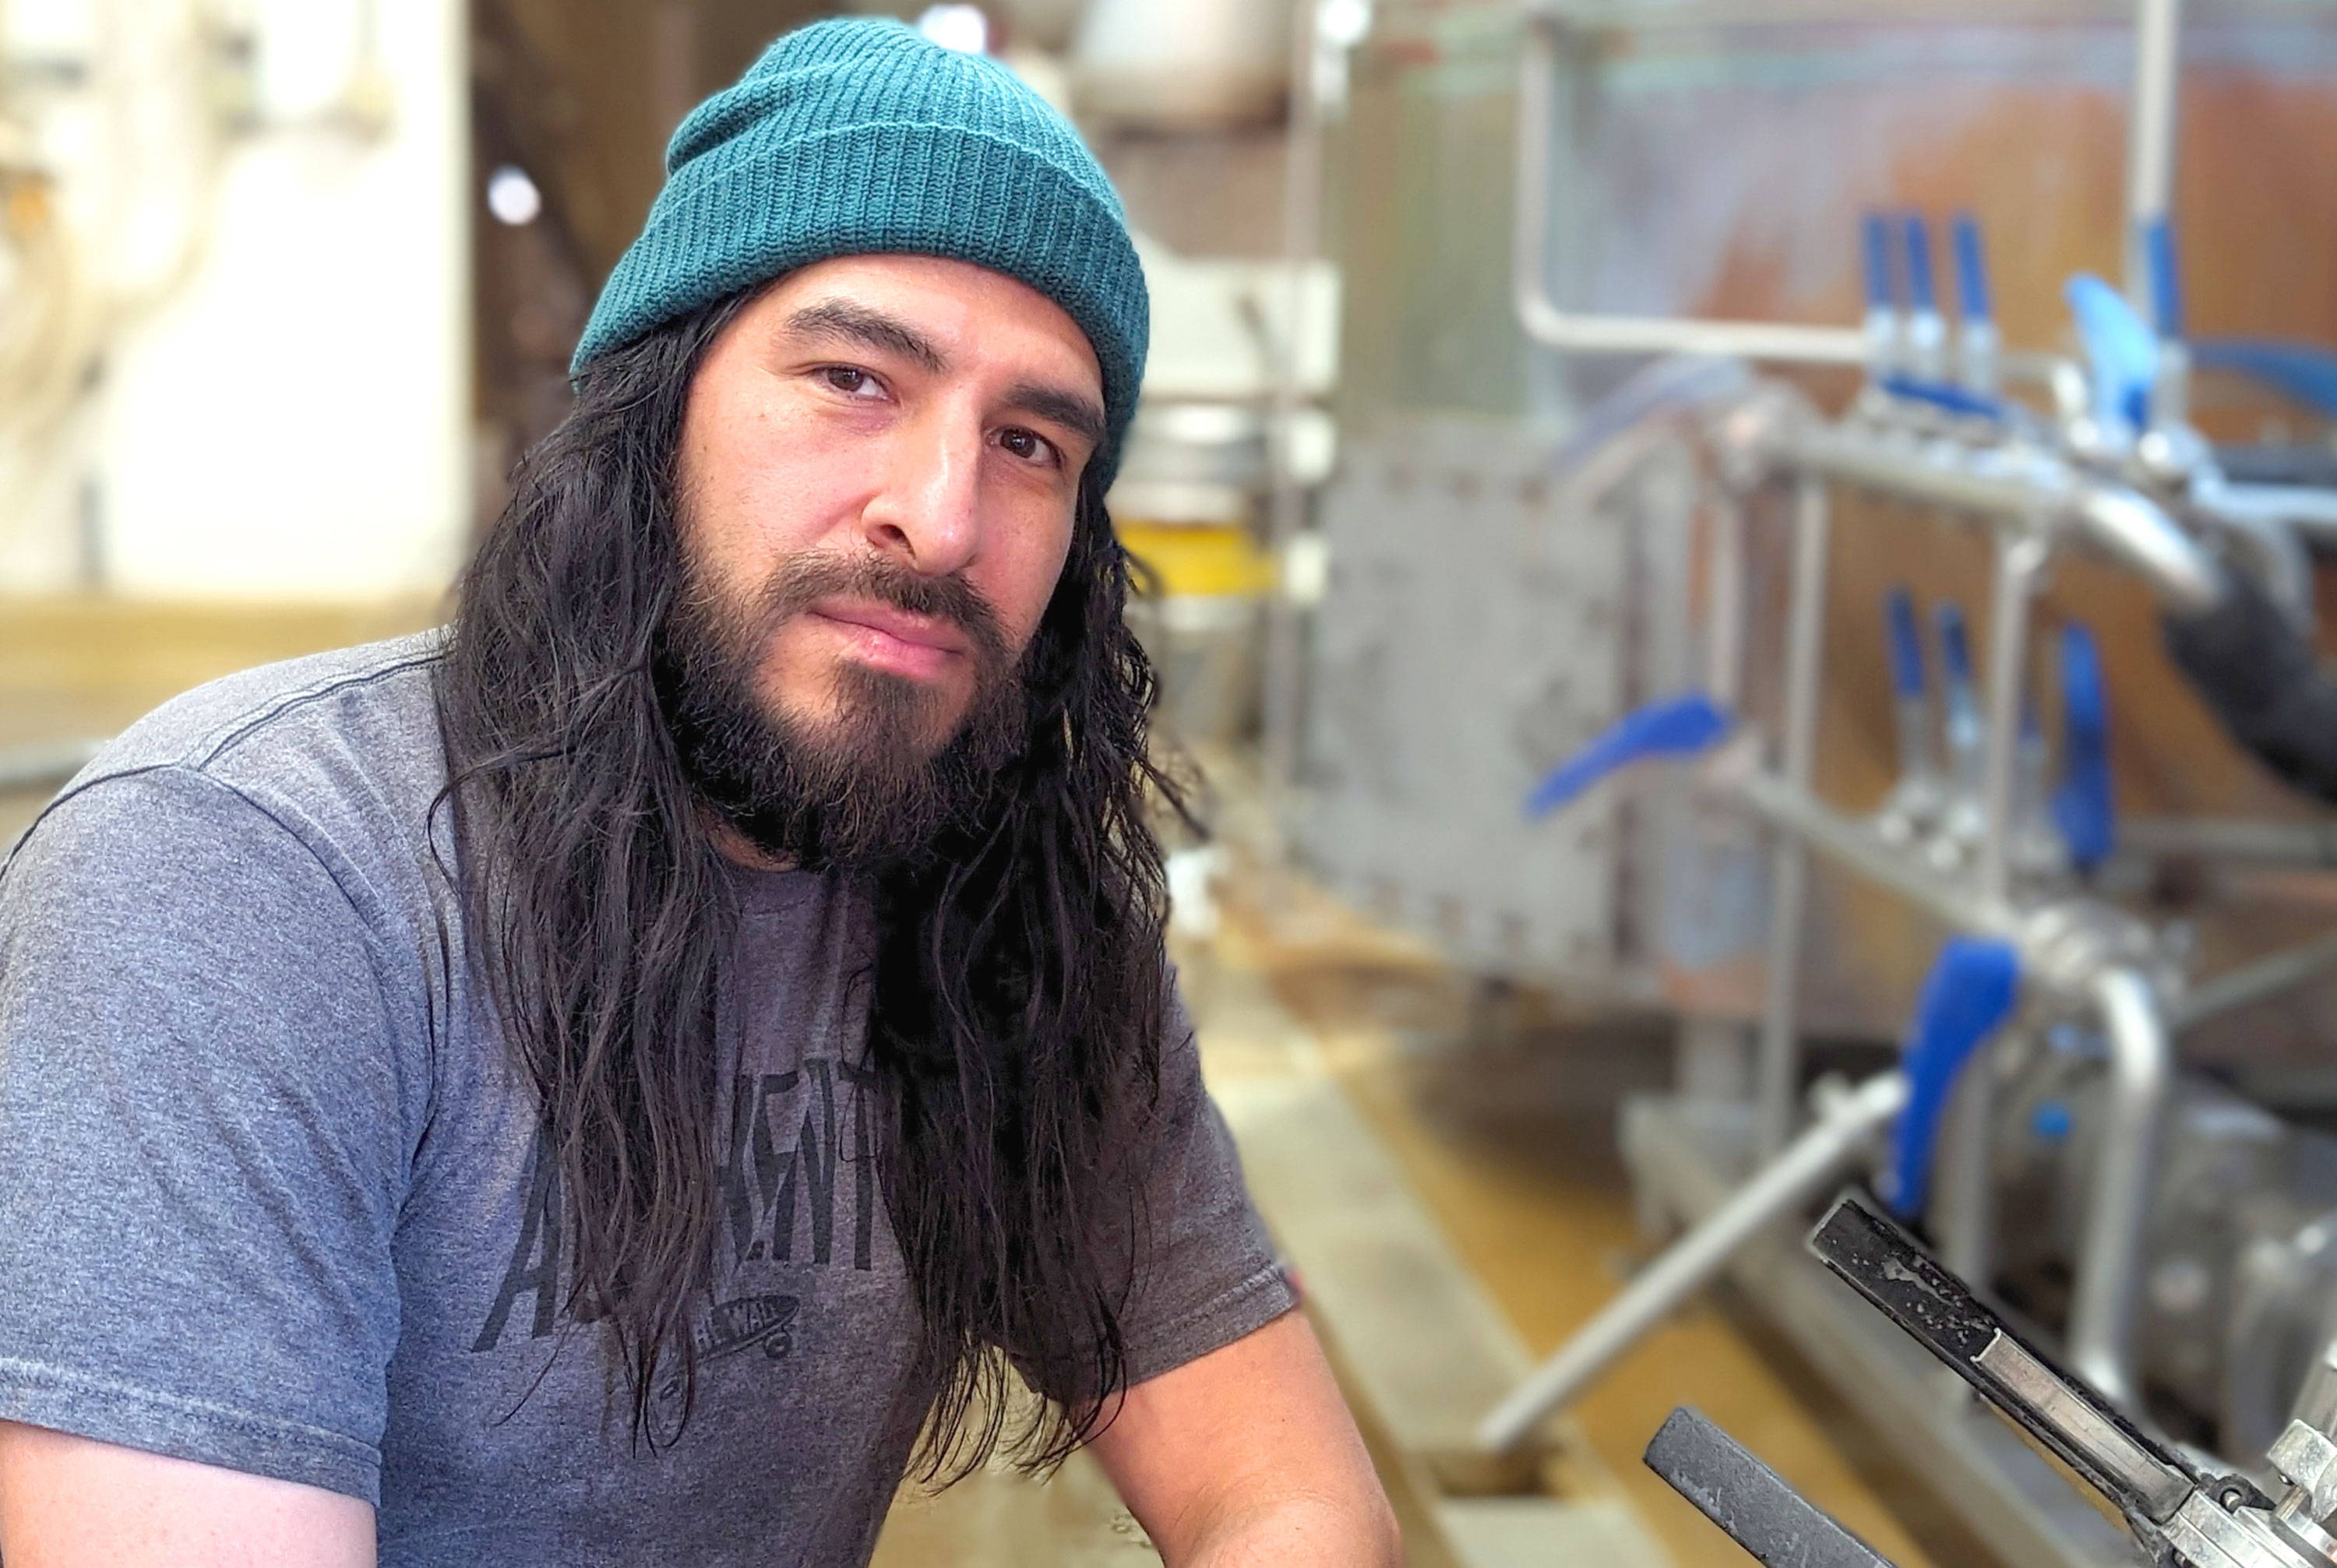 Man in a beanie and t-shirt next to brewing vats